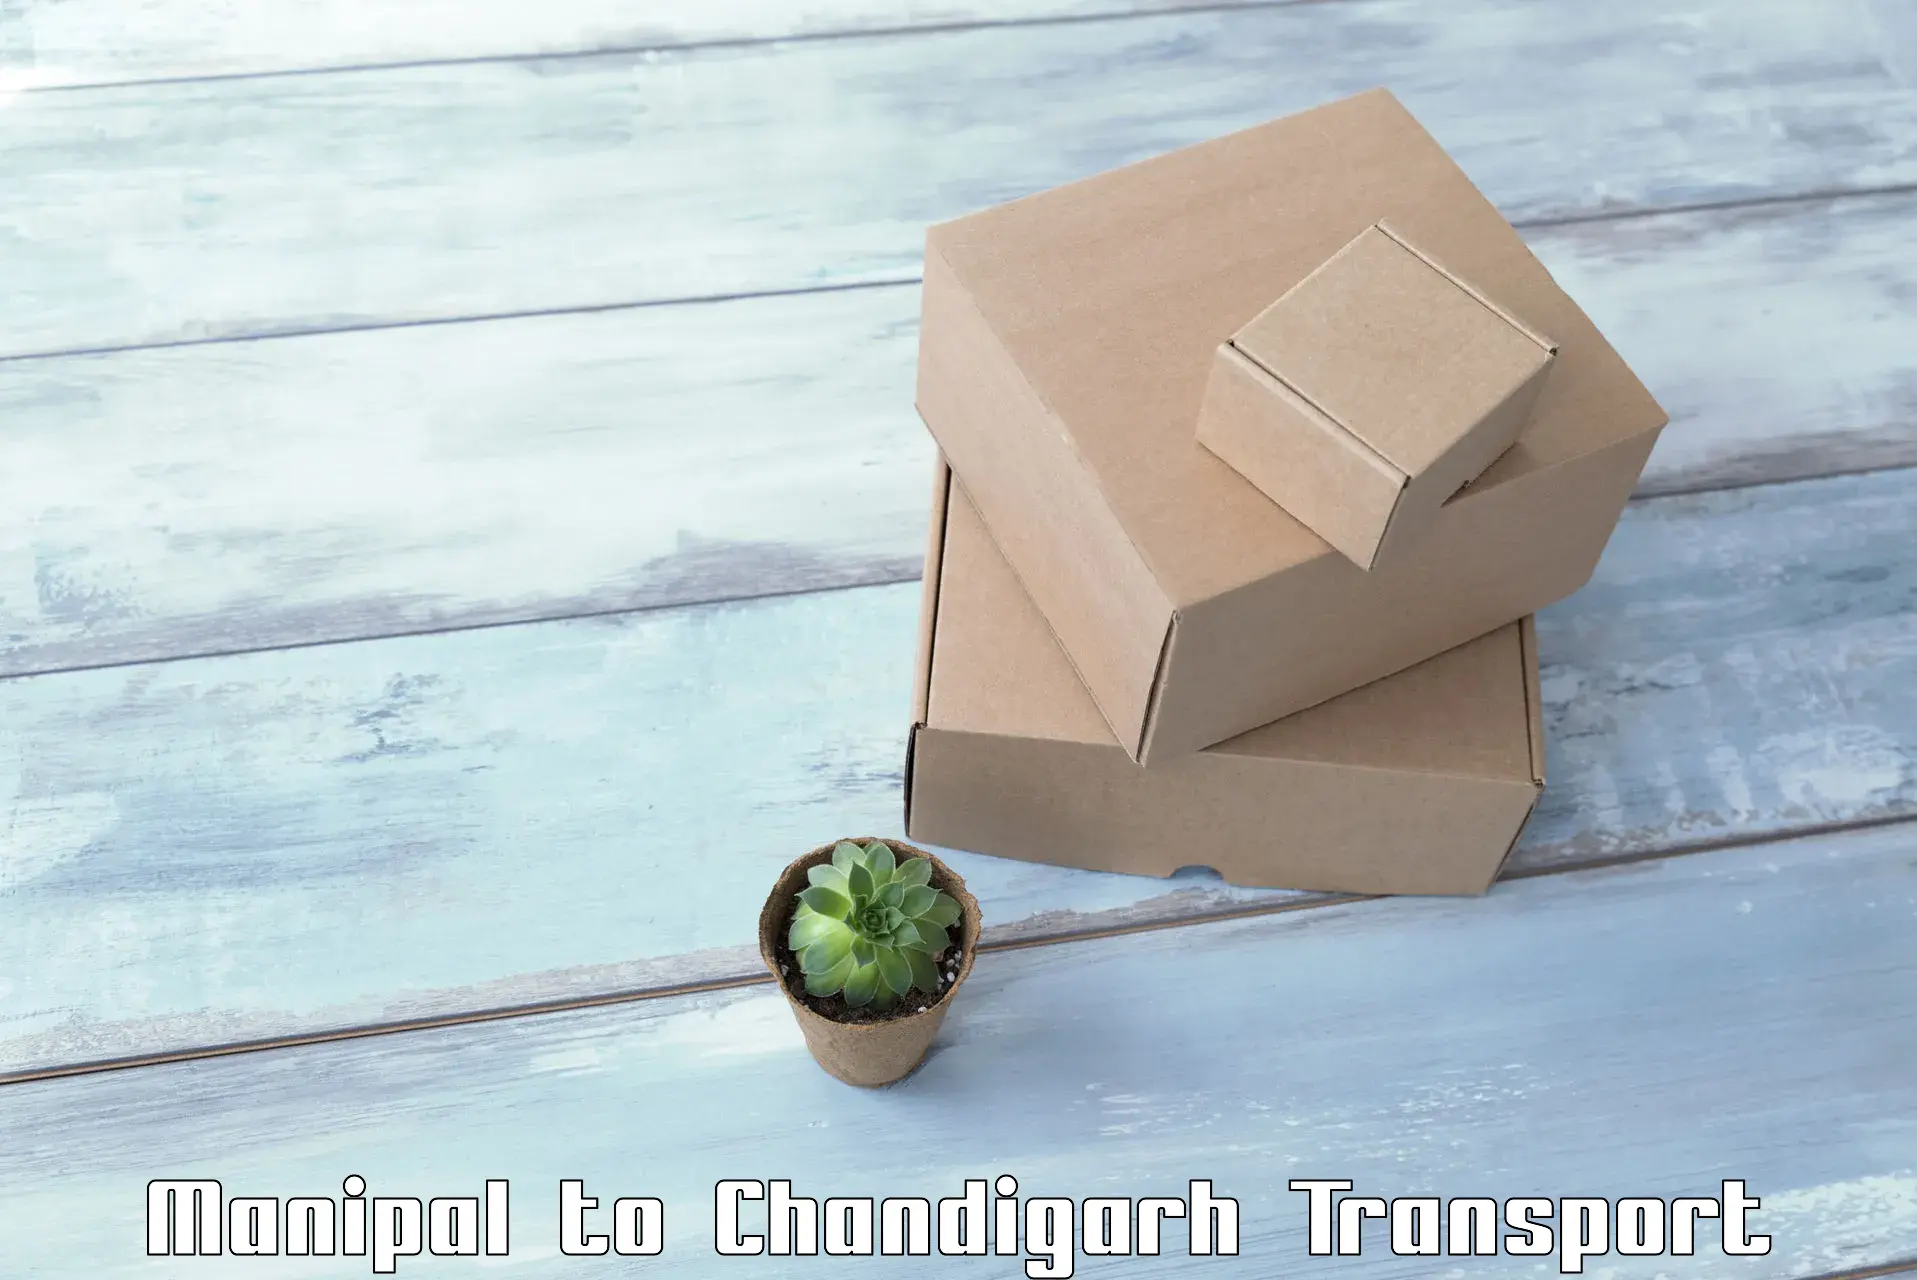 Nearby transport service Manipal to Chandigarh